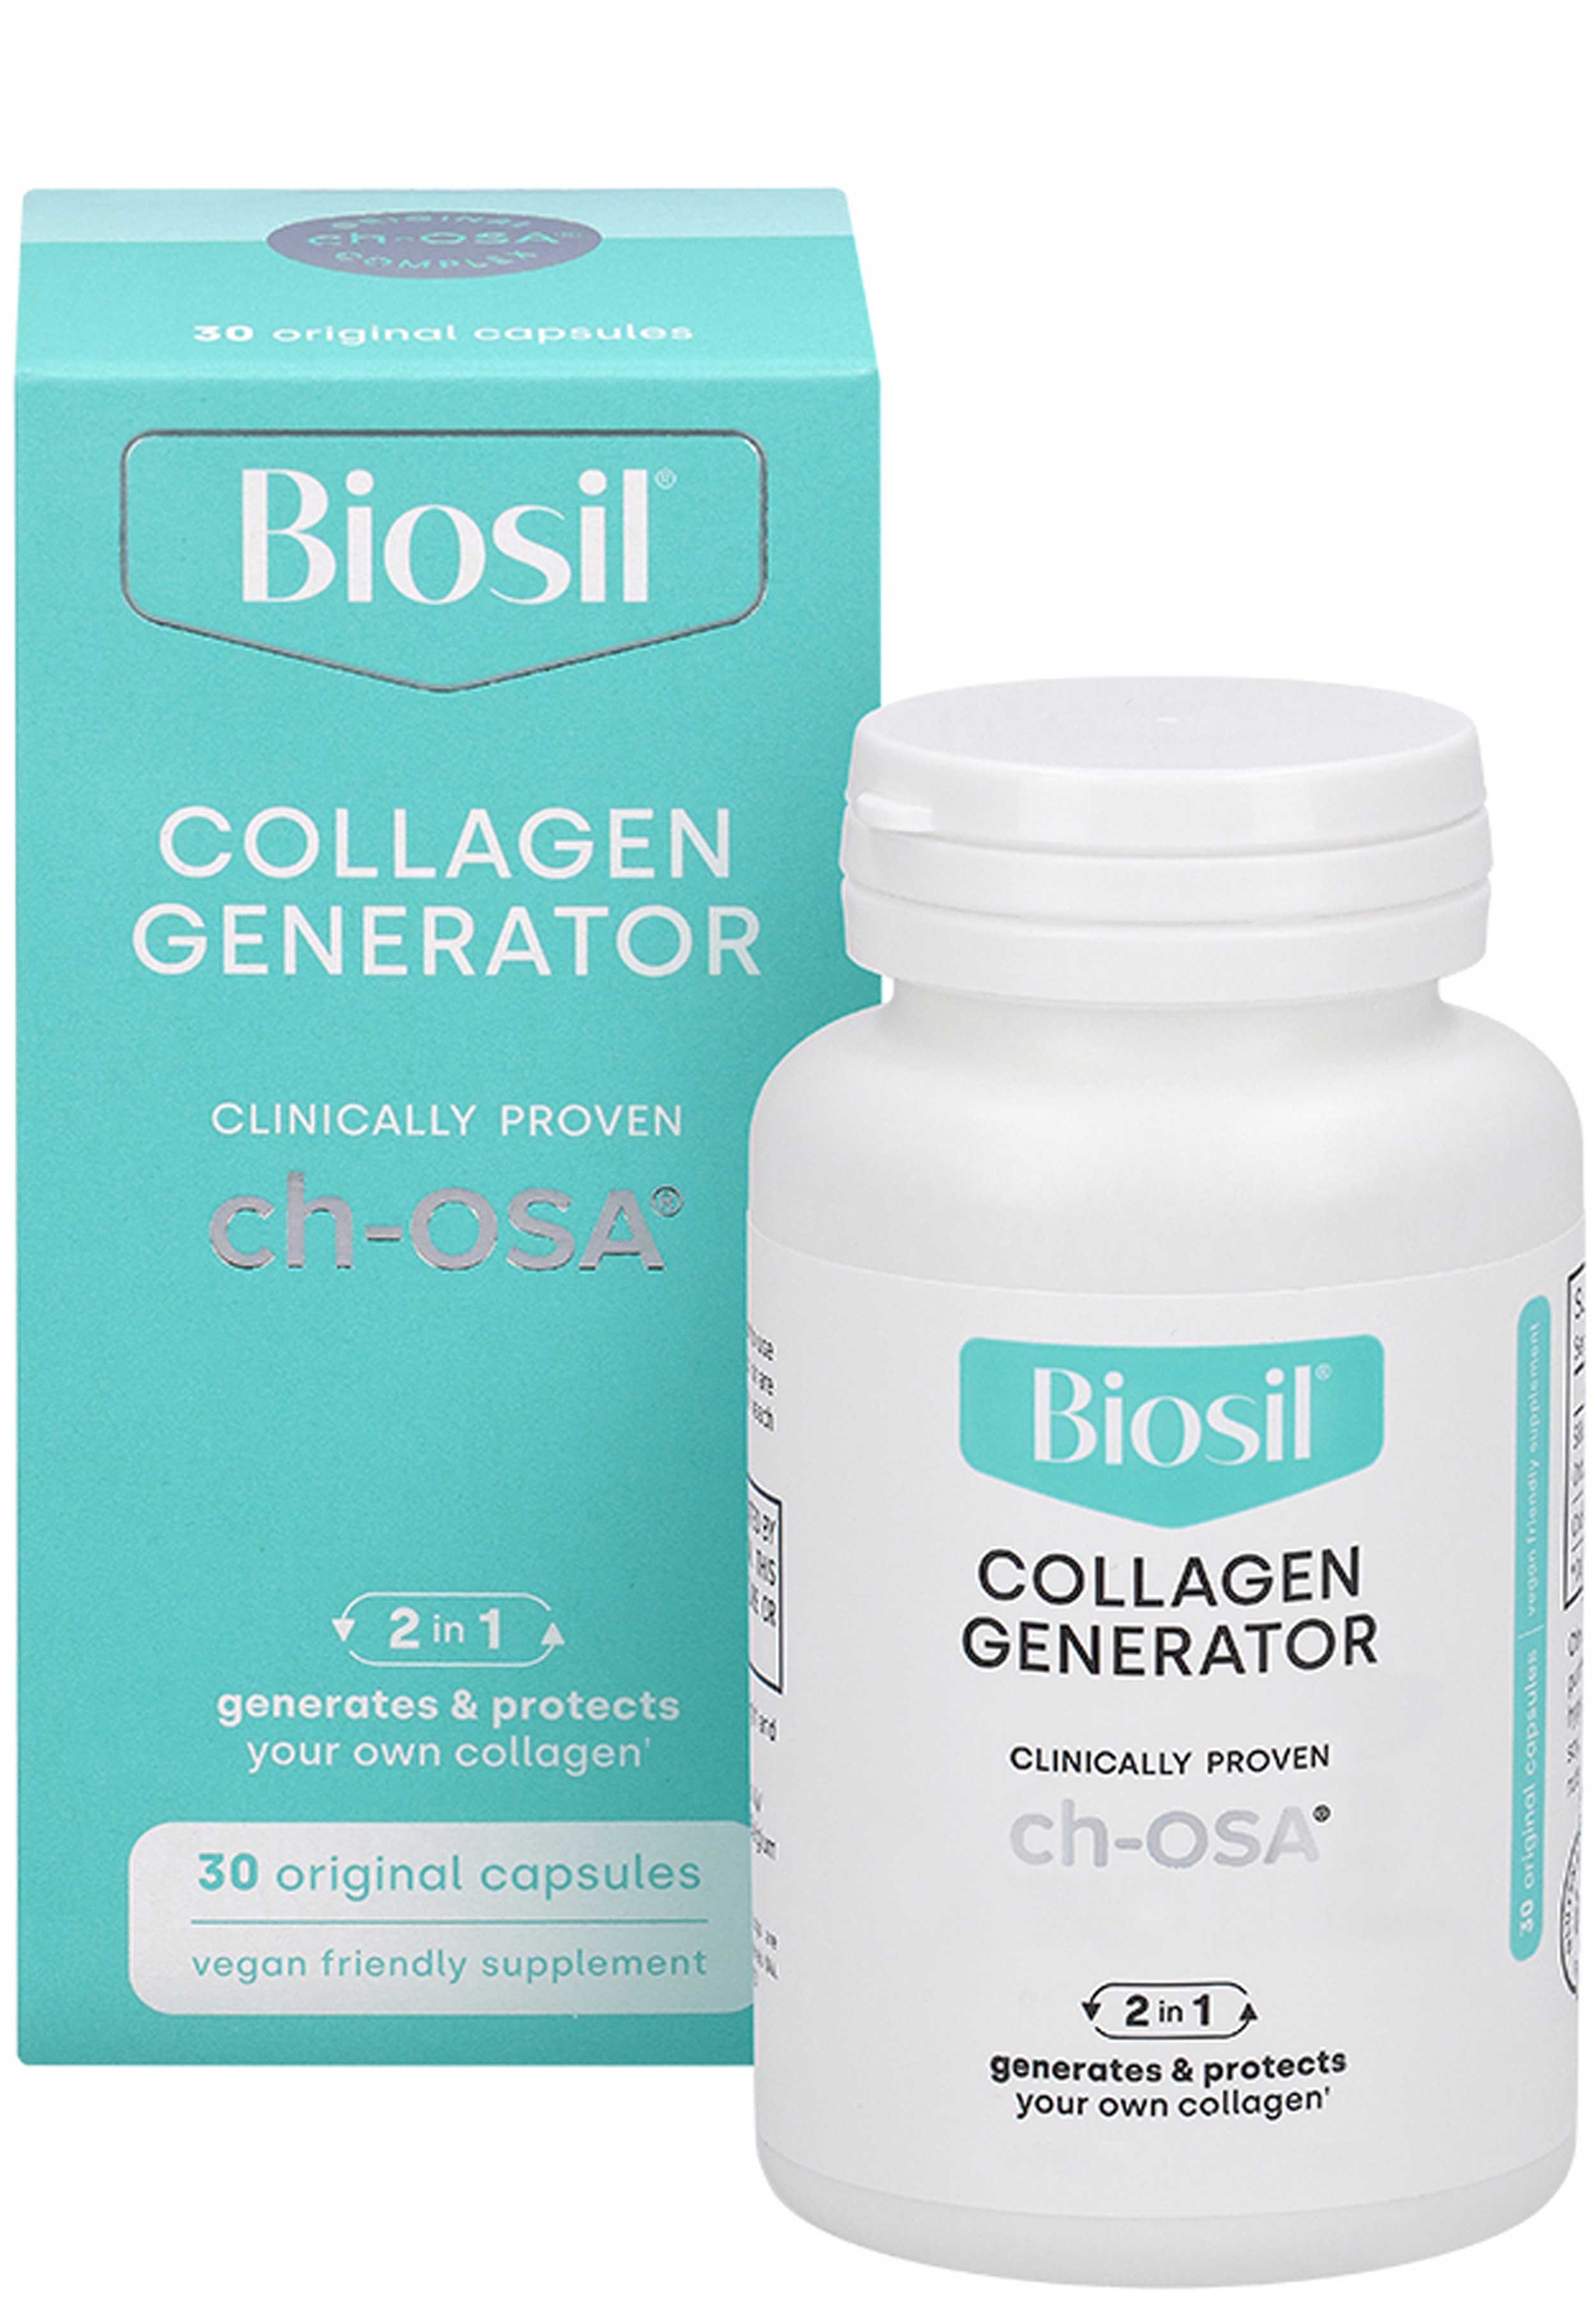 Natural Factors BioSil Collagen Generator (Formerly known as BioSil Hair, Skin, Nails)